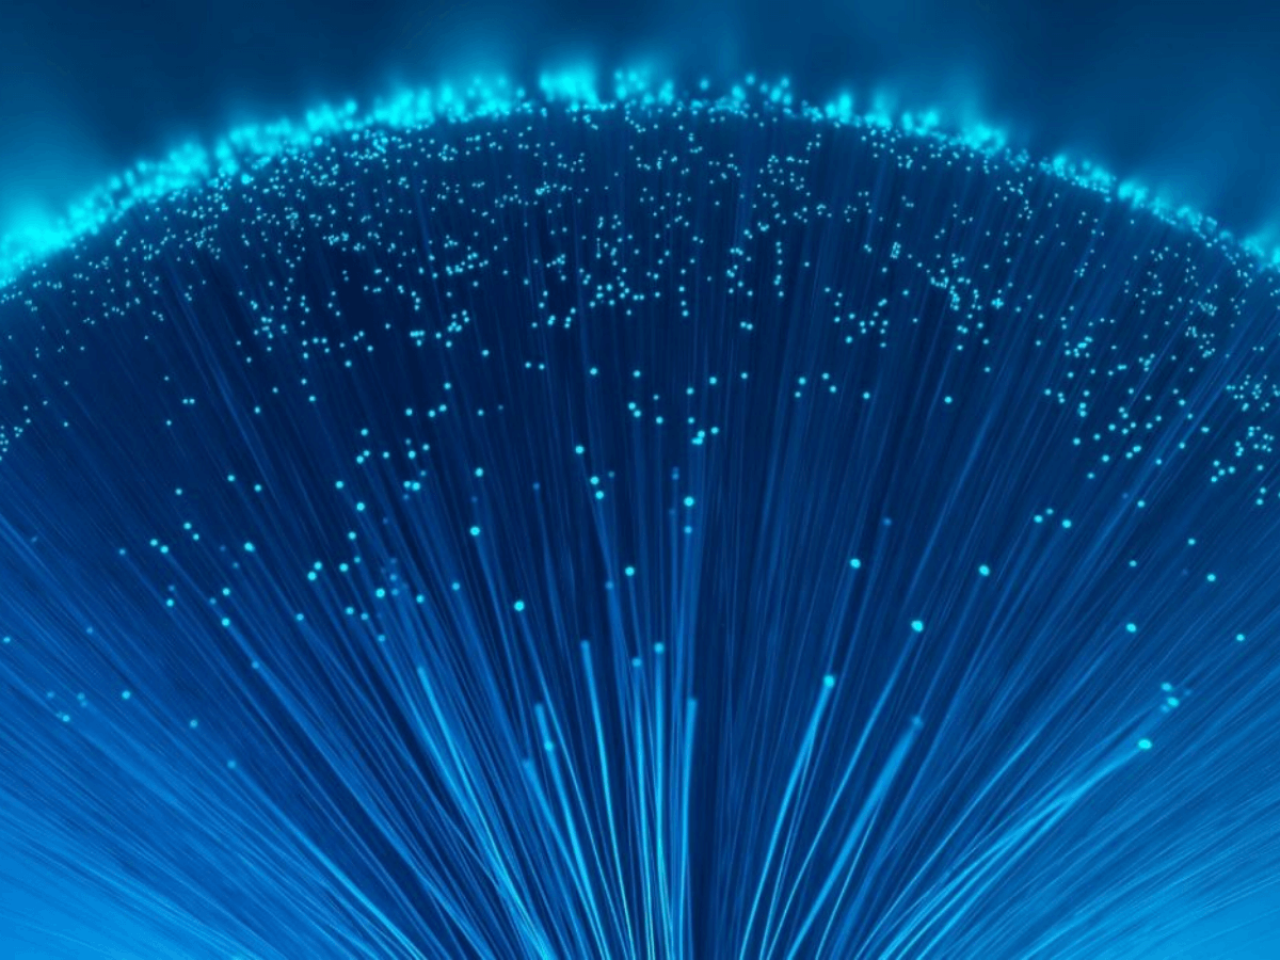 Optical fiber carries high-speed data in highly dense server environments.